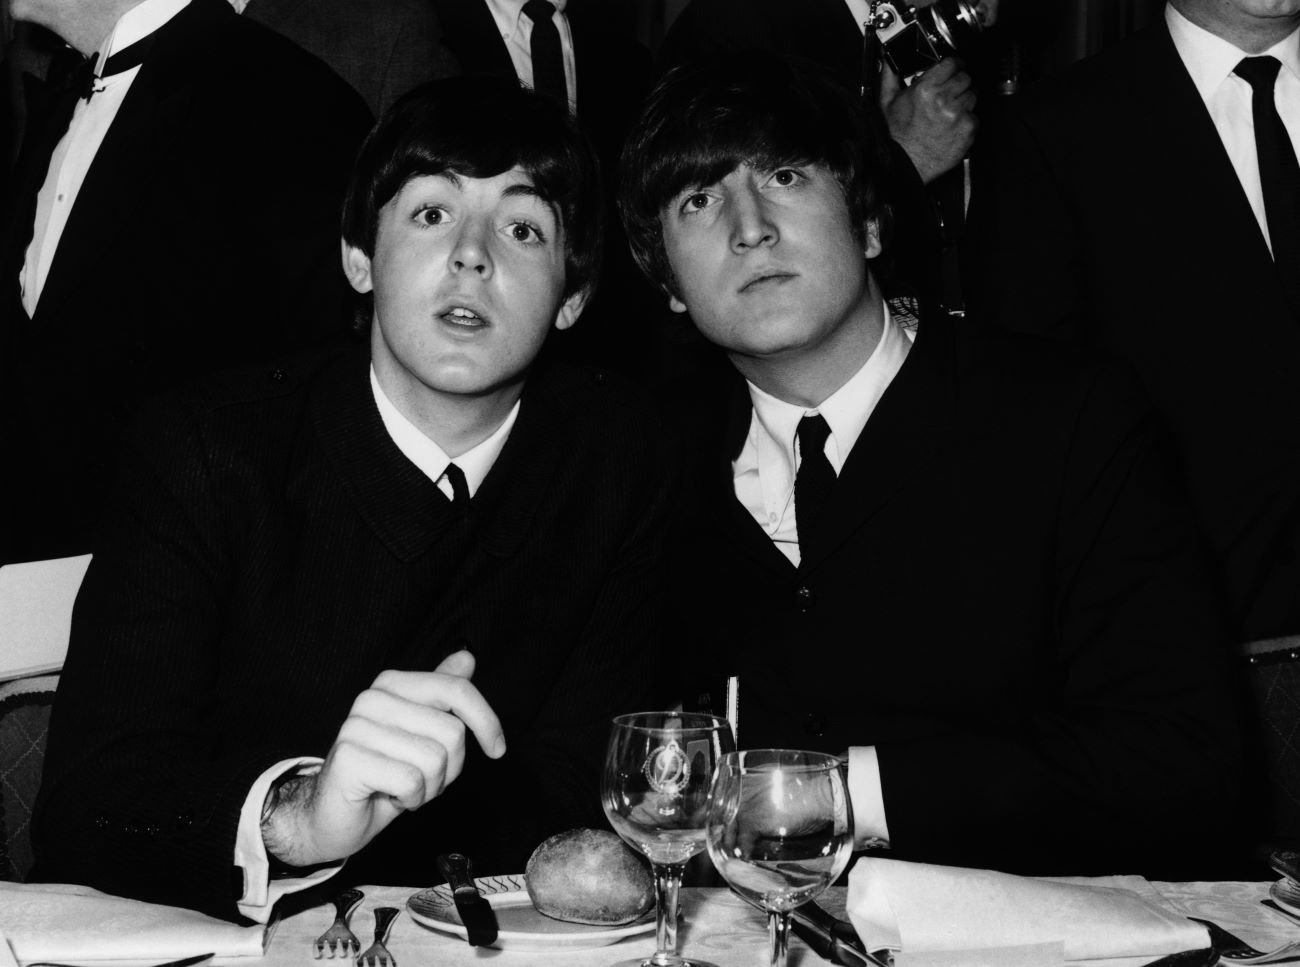 A black and white picture of Paul McCartney and John Lennon sitting at a table together.